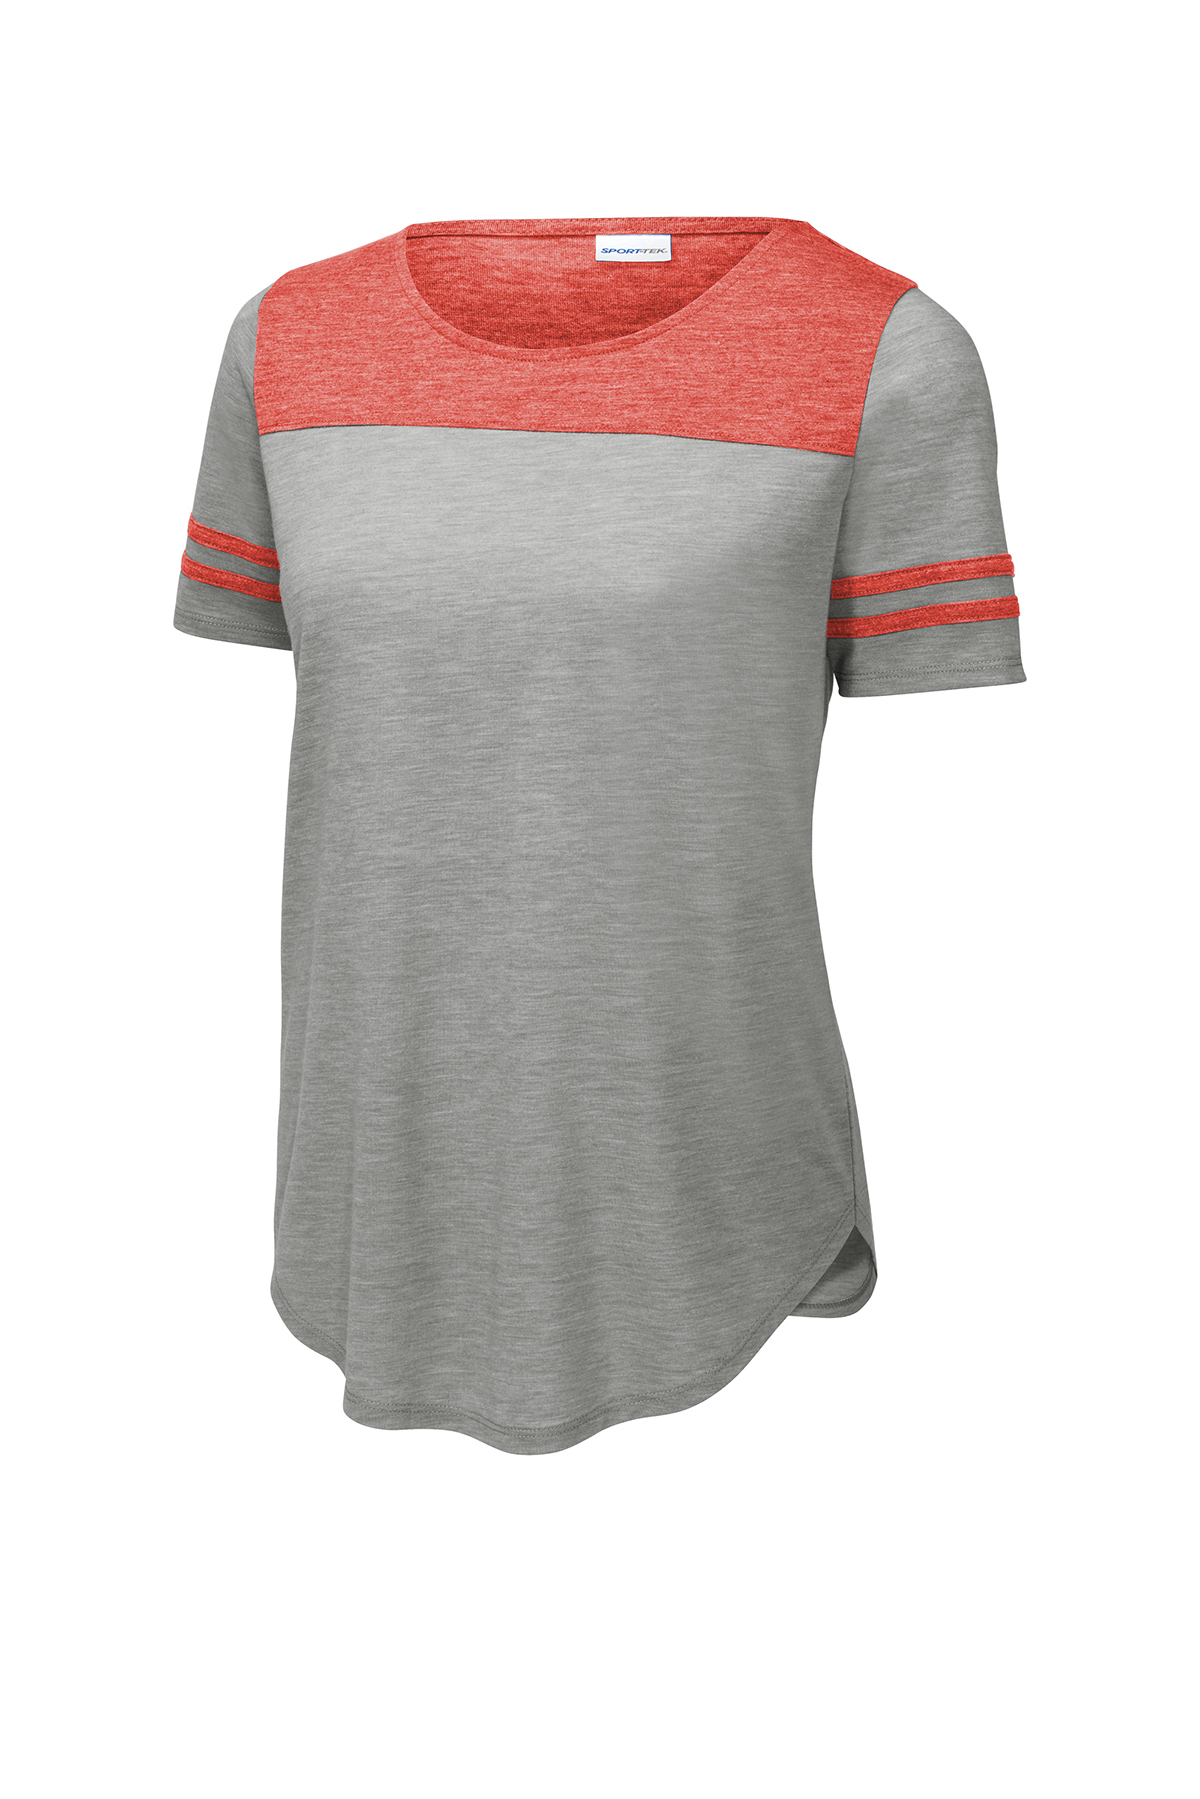 CC4200 Comfort Colors Ladies' Lightweight Fitted Tee – AP Workwear